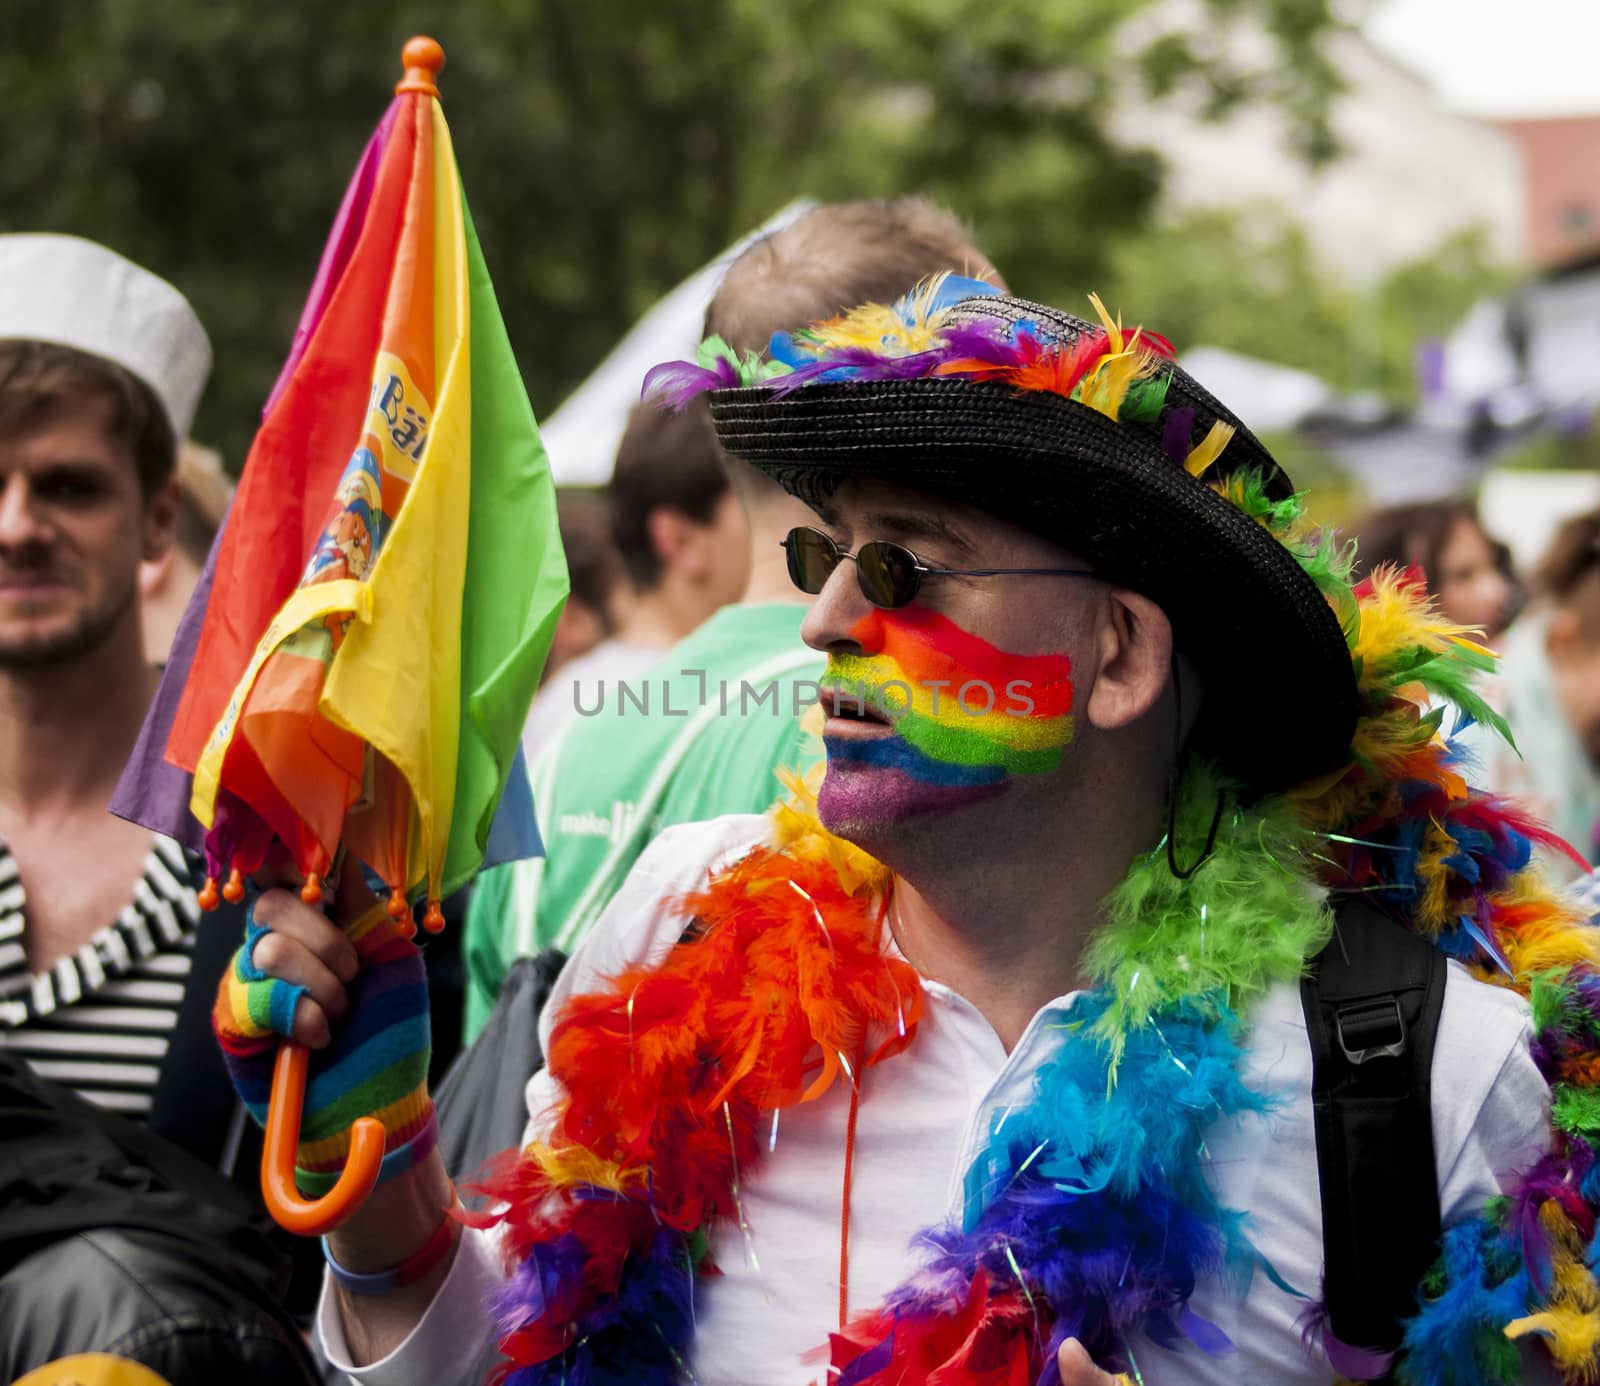 BERLIN, GERMANY - JUNE 21, 2014:Christopher Street Day.Crowd of people participate in the parade celebrates gays, lesbians, bisexuals and transgenders.Prominent in the image a elaborately dressed man with garlands and colorful umbrella.